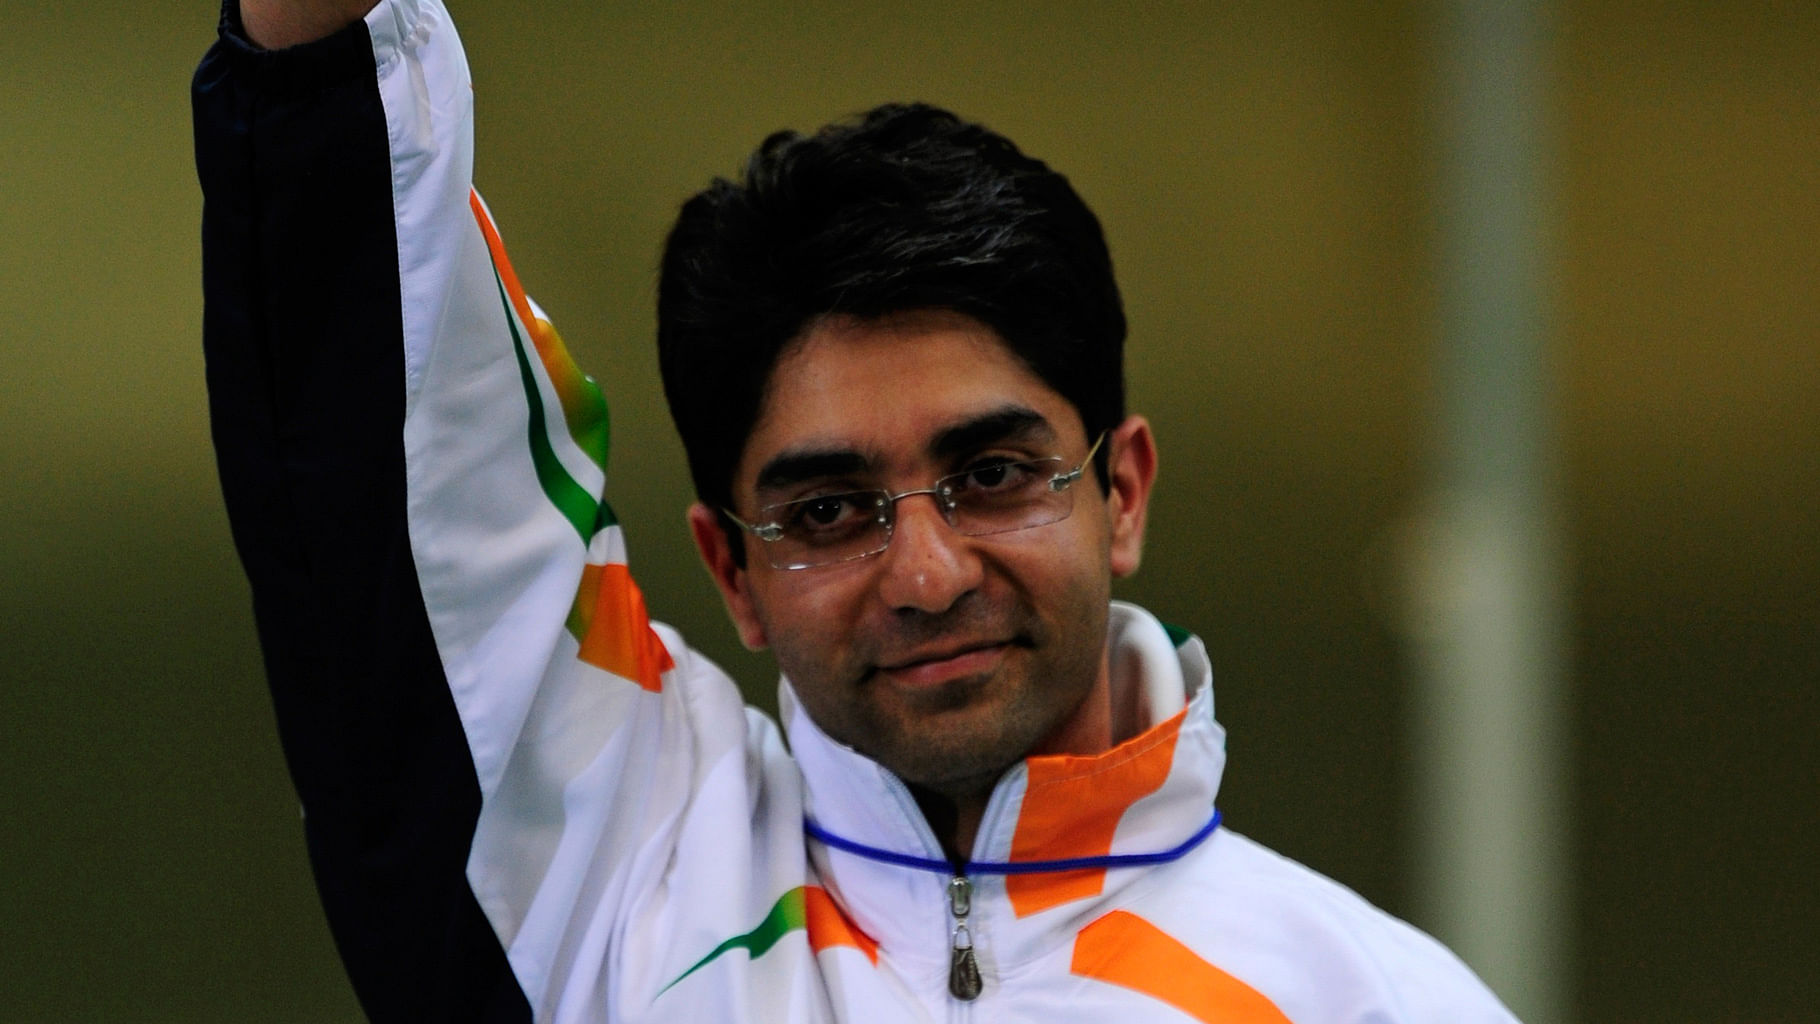 Abhinav Bindra, India’s lone individual Olympic gold medallist, officially announced his retirement from shooting. (Photo: Reuters)